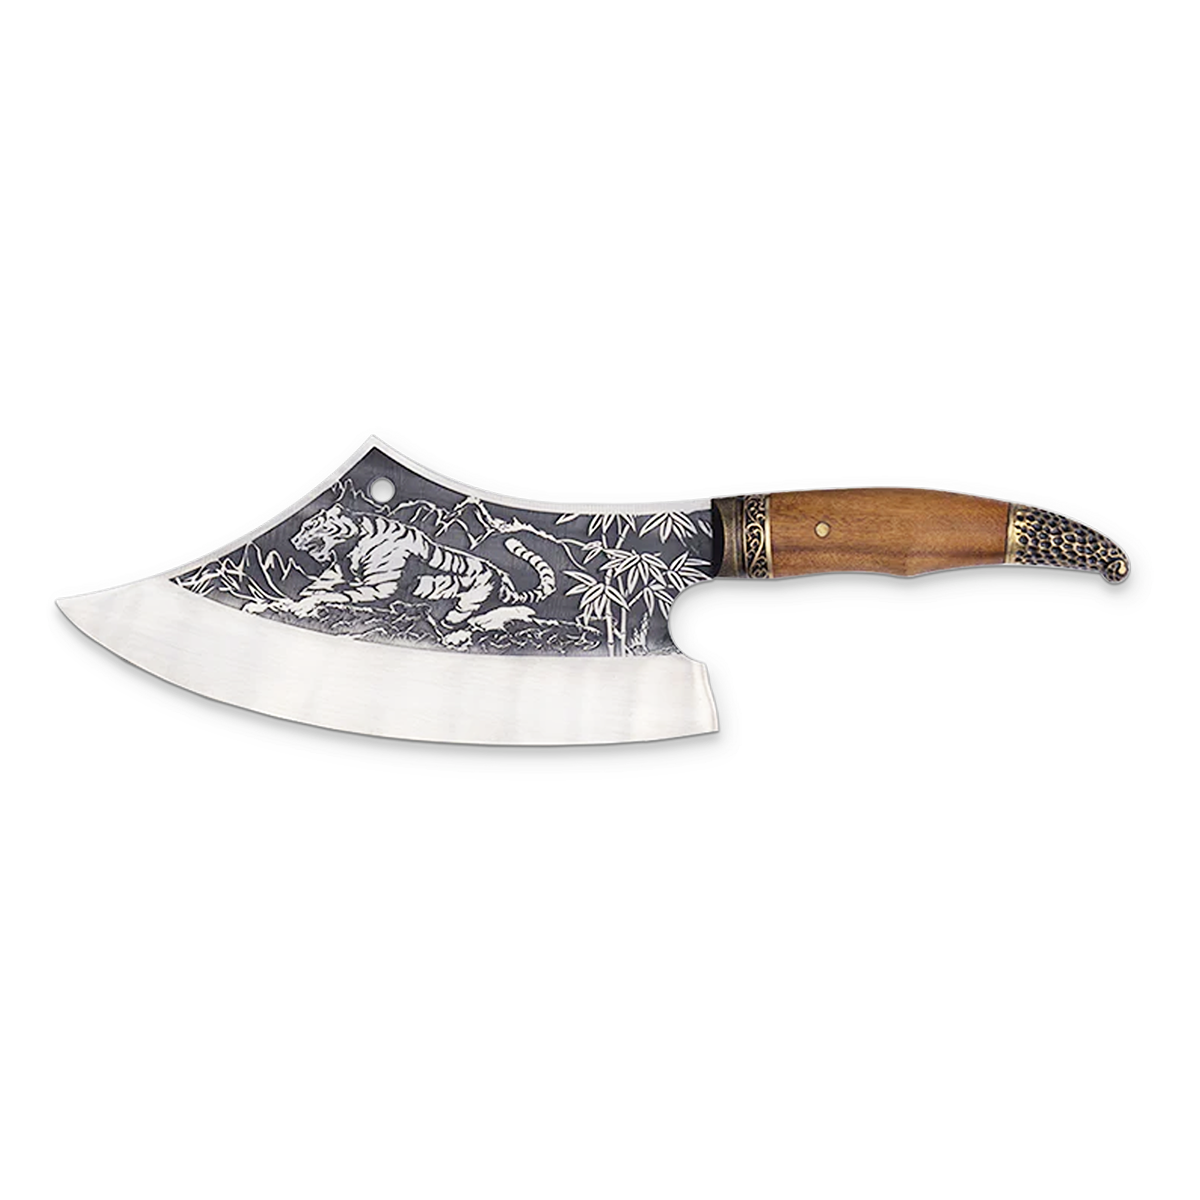 Unleash the power of the Ragnar, the toughest and sharpest knife